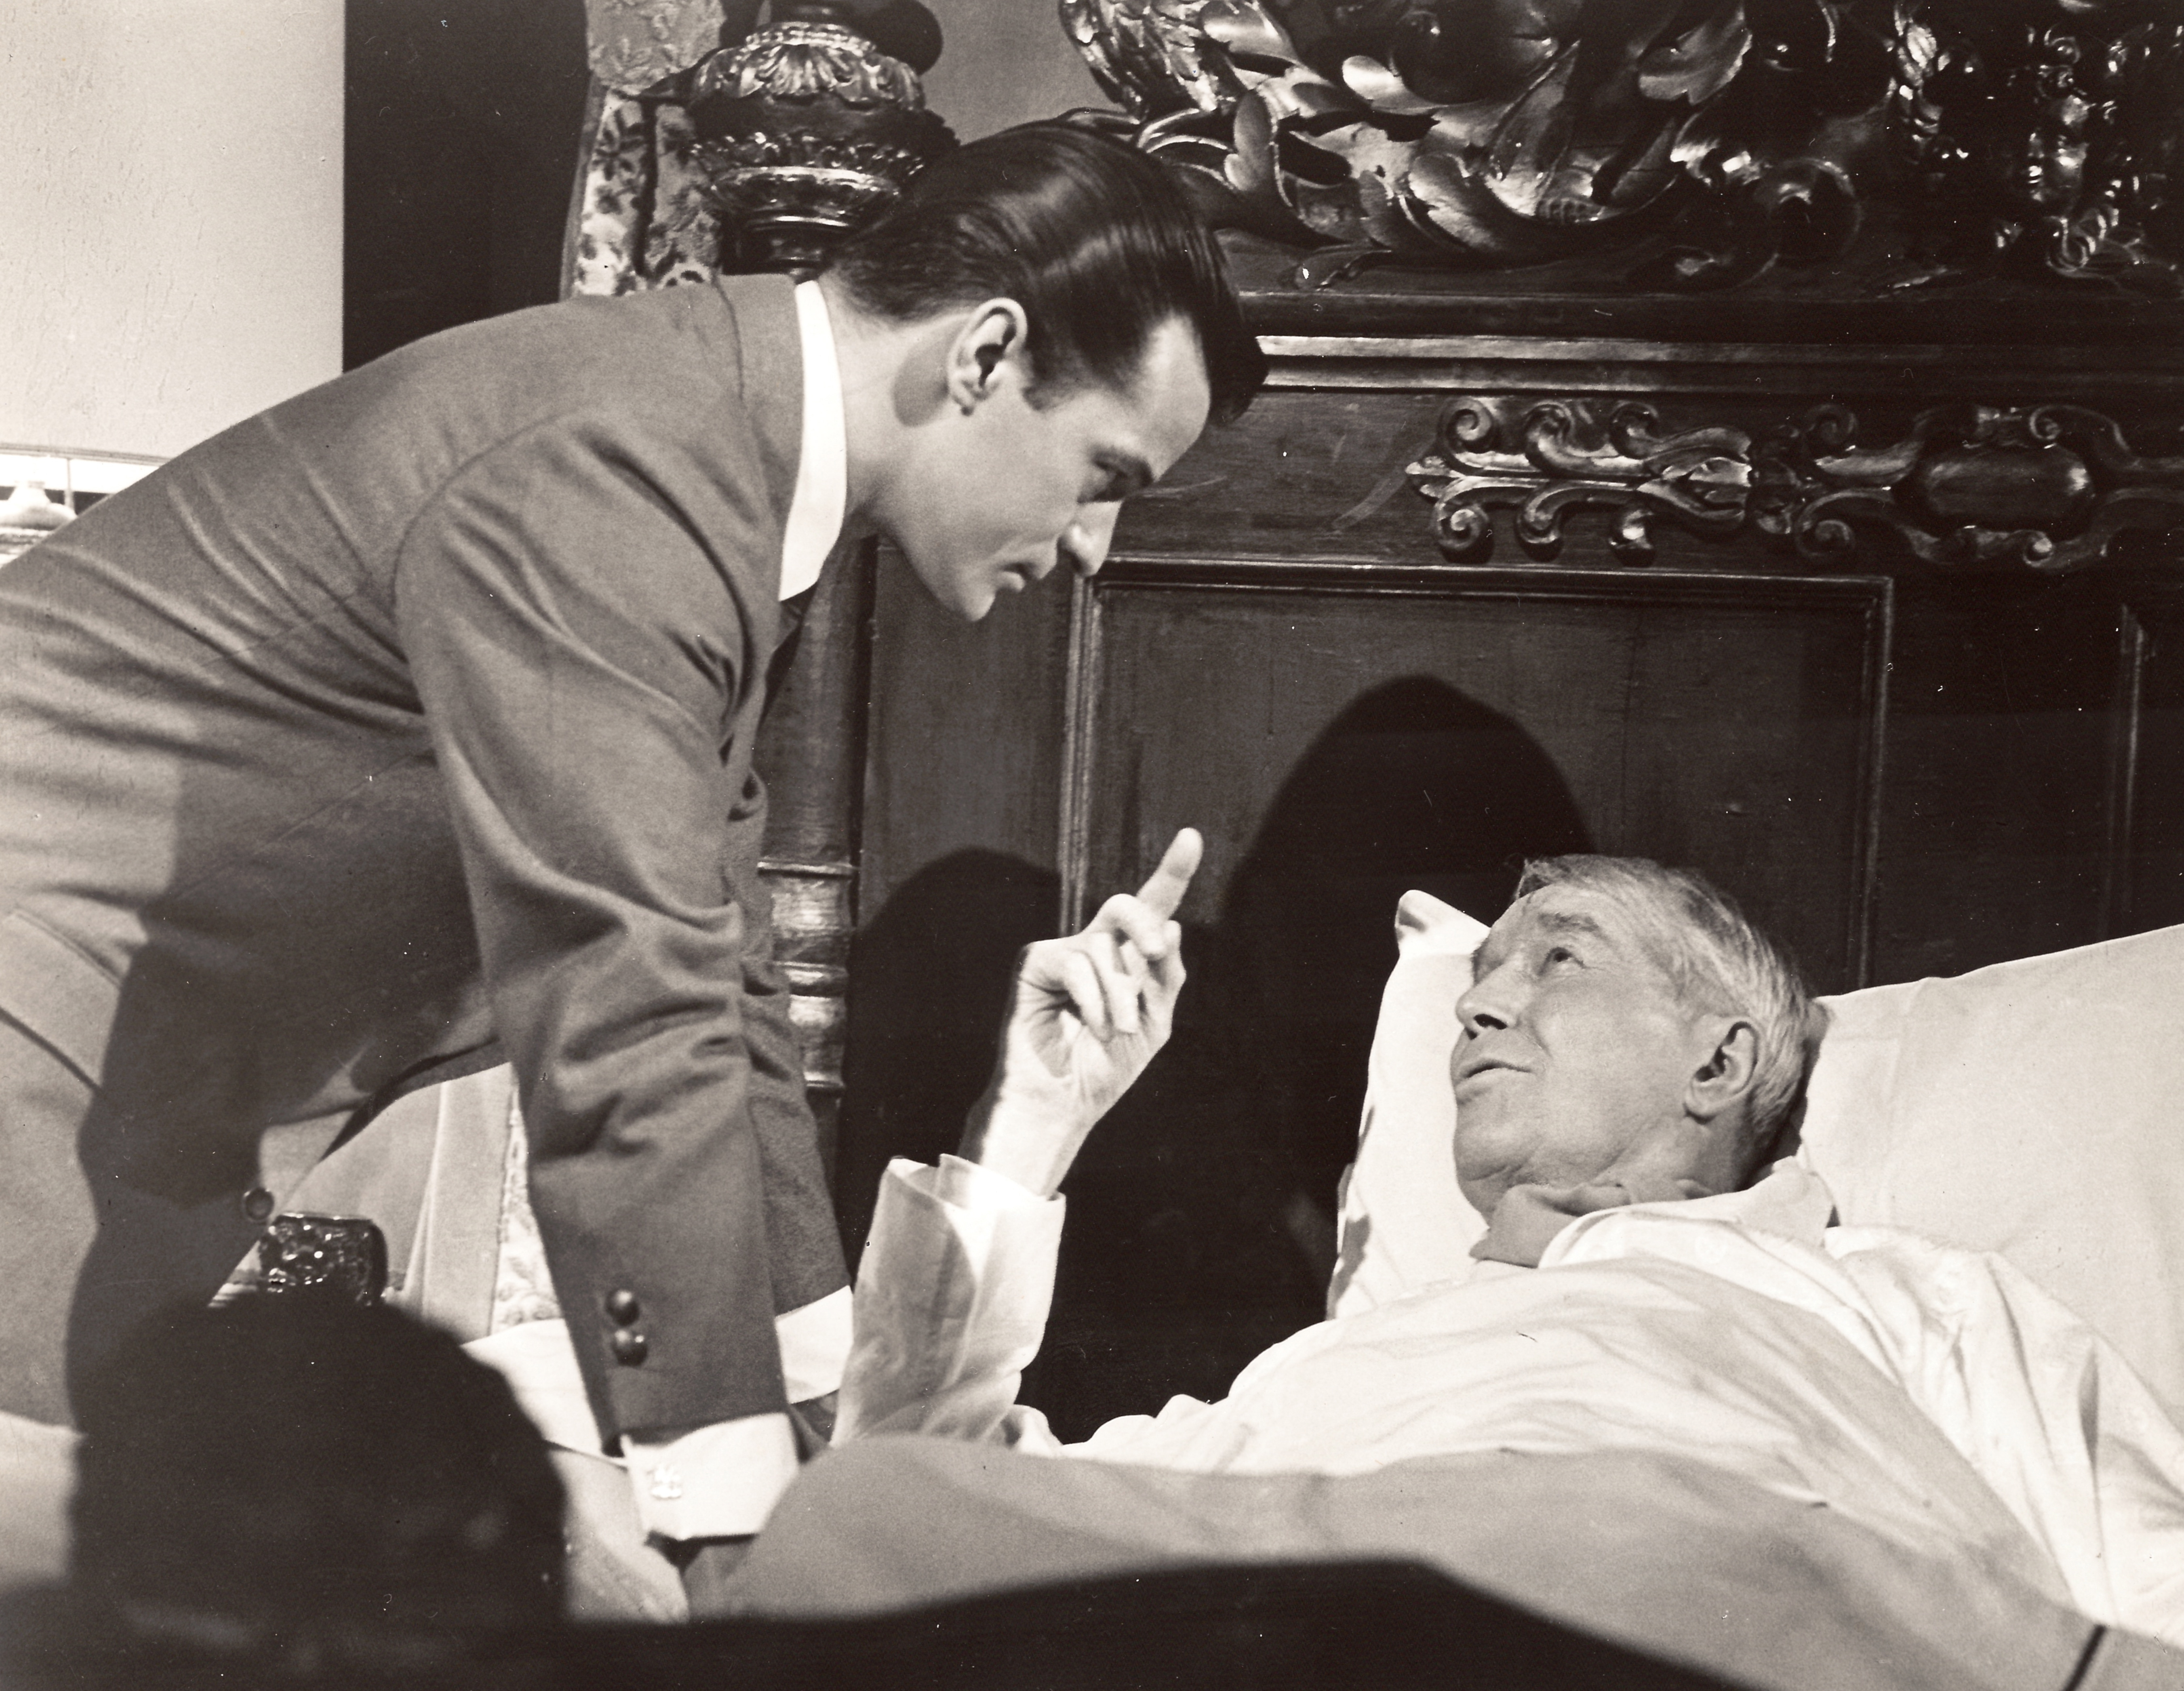 Robert Goulet and Maurice Chevalier in the movie "I'd Rather Be Rich"